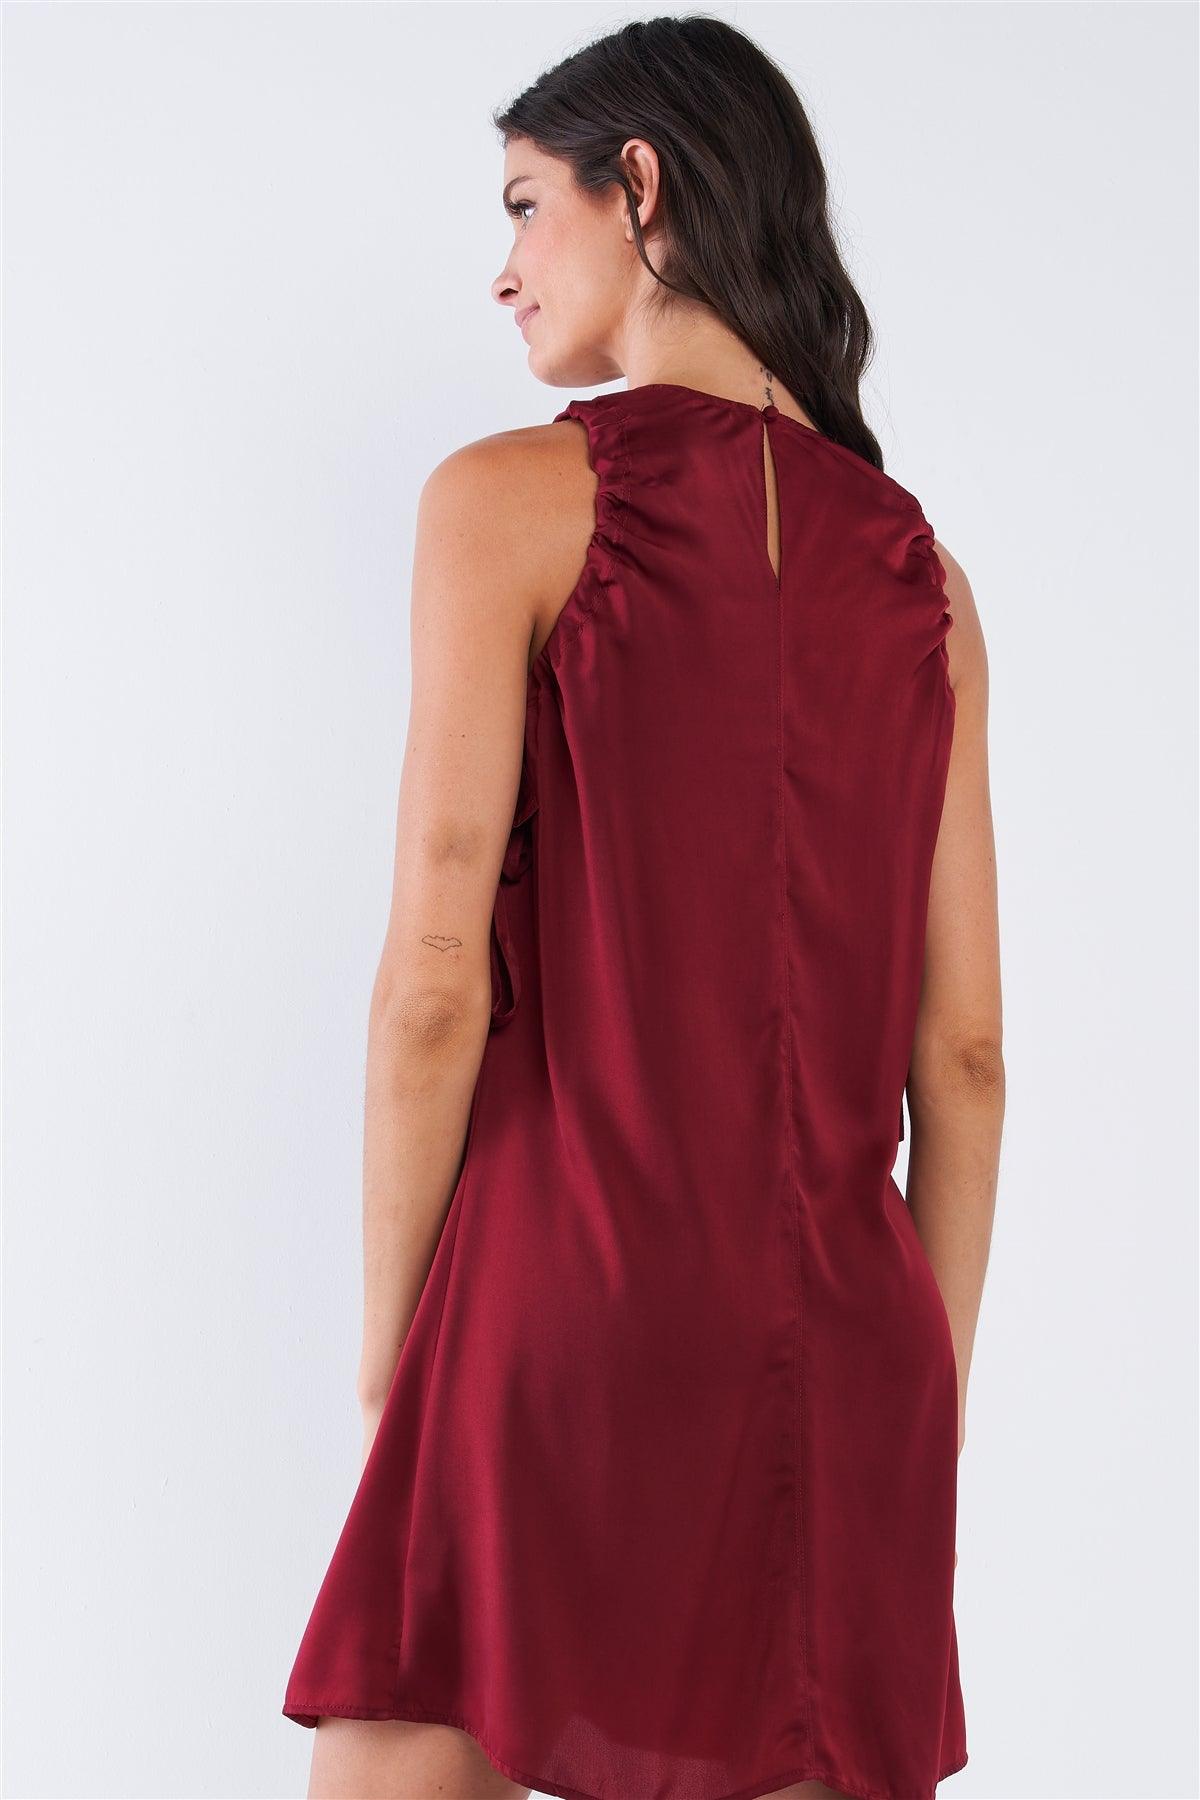 Wine Red Satin Loose Fit Sleeveless Round Neck Mini Dress With Side Ribbon Draw String Ties Dress